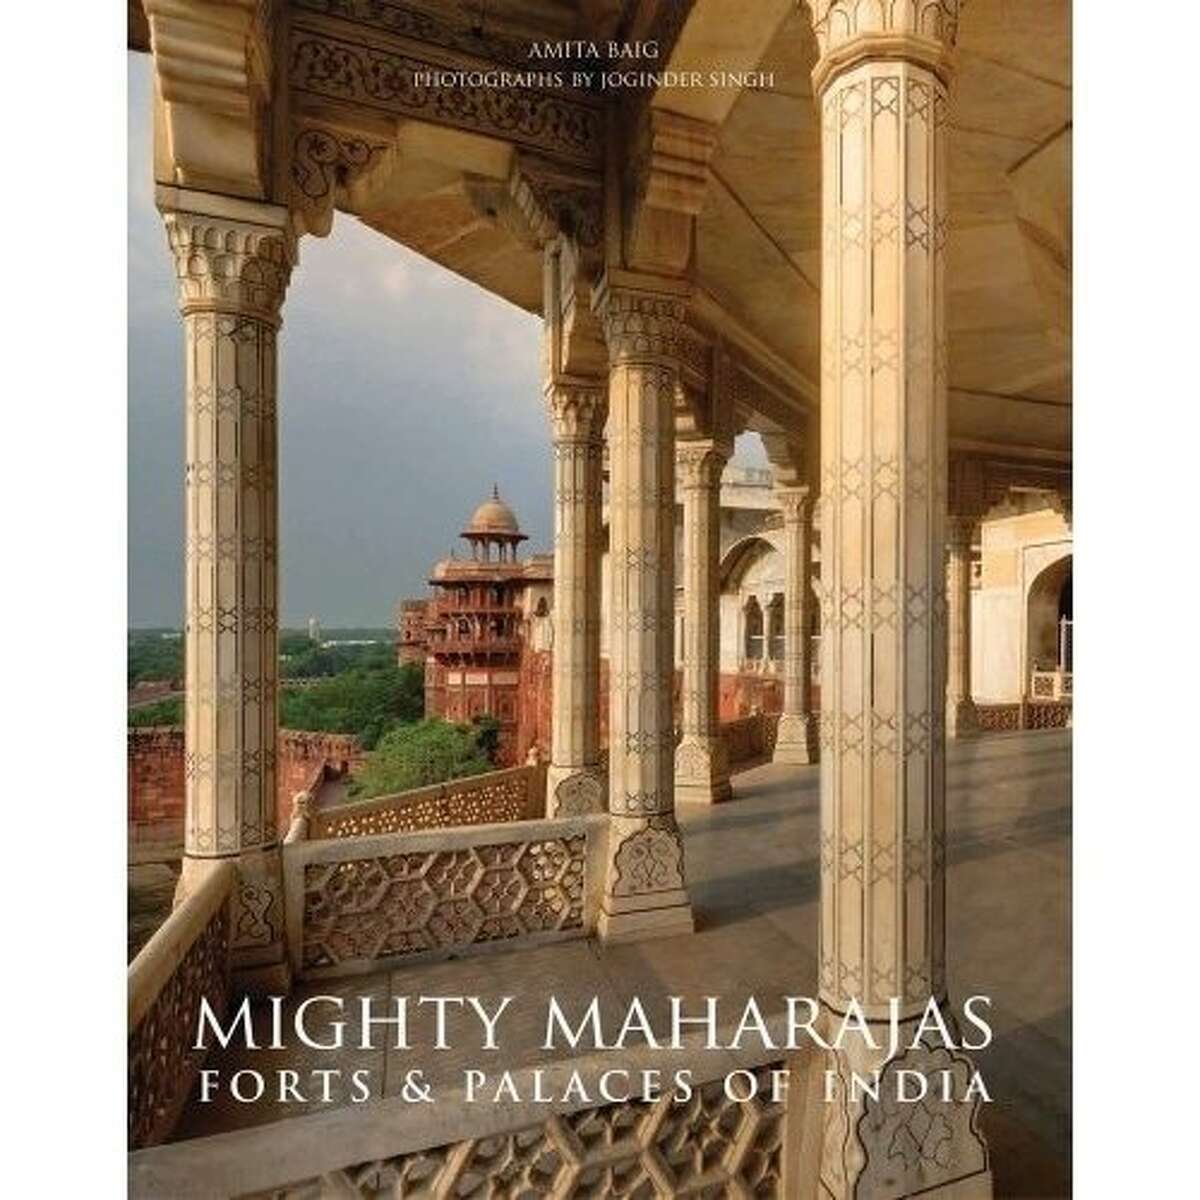 Mighty Maharajas: Forts & Palaces of India, by Amita Baig with photographs by Joginder Singh